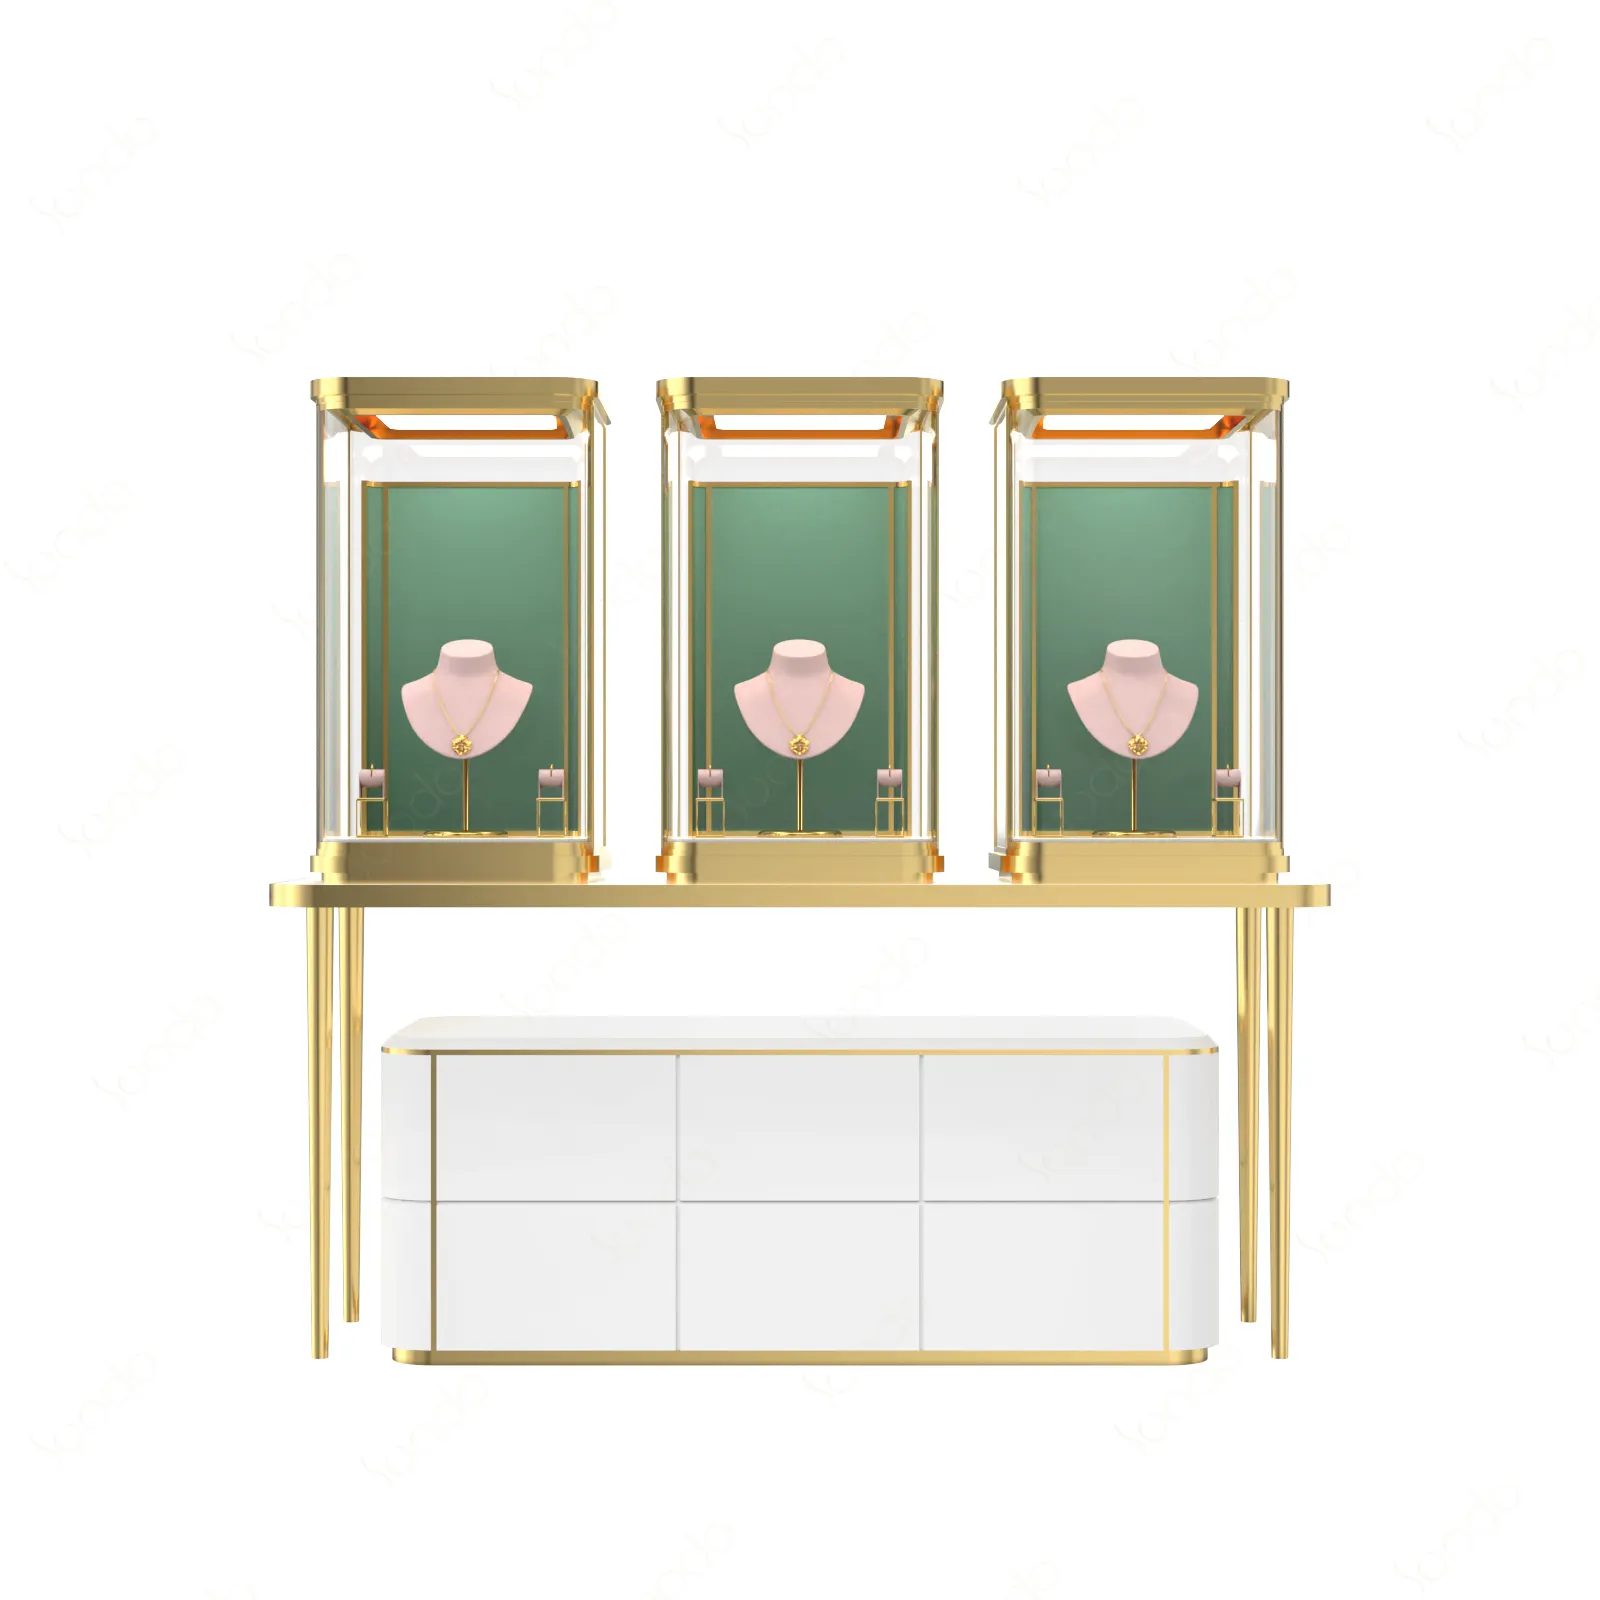 High End Luxury Gold Vitrine Showcase Jewelry Display Jewellery Shop Interior Boutique Display Cabinet Design with led lights